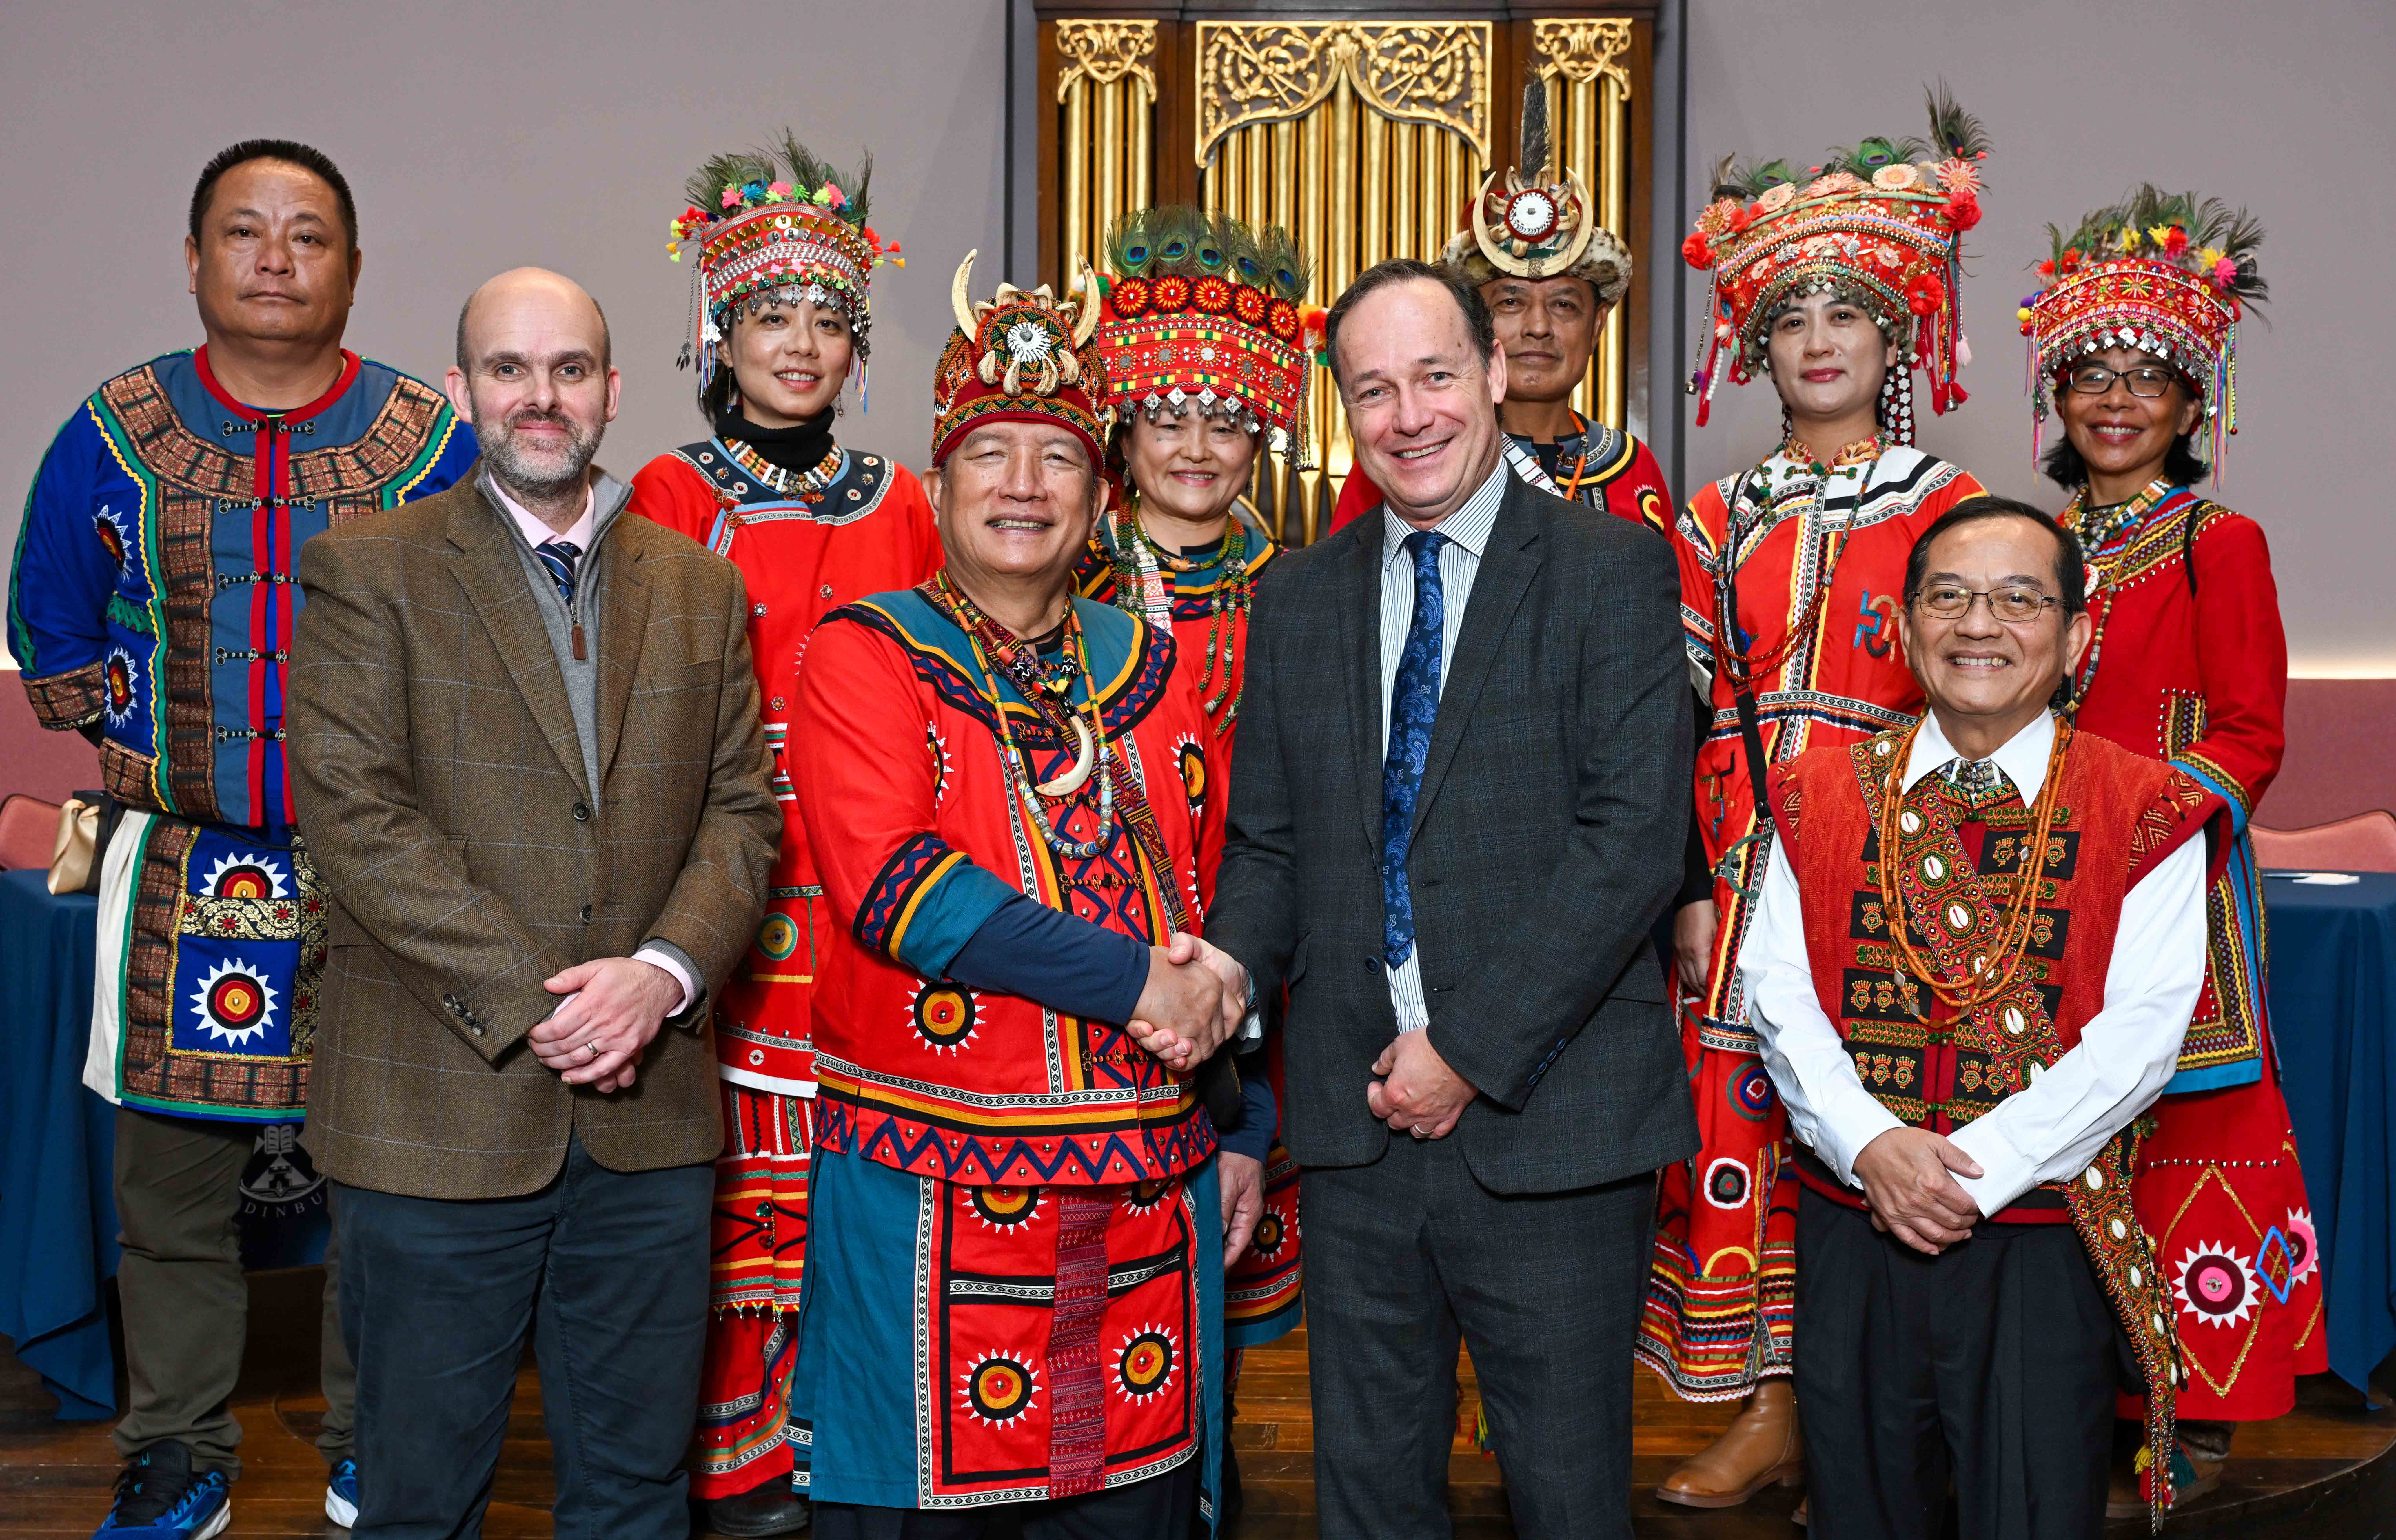 A delegation from the Mudan community visited the university as part of the repatriation ceremony.